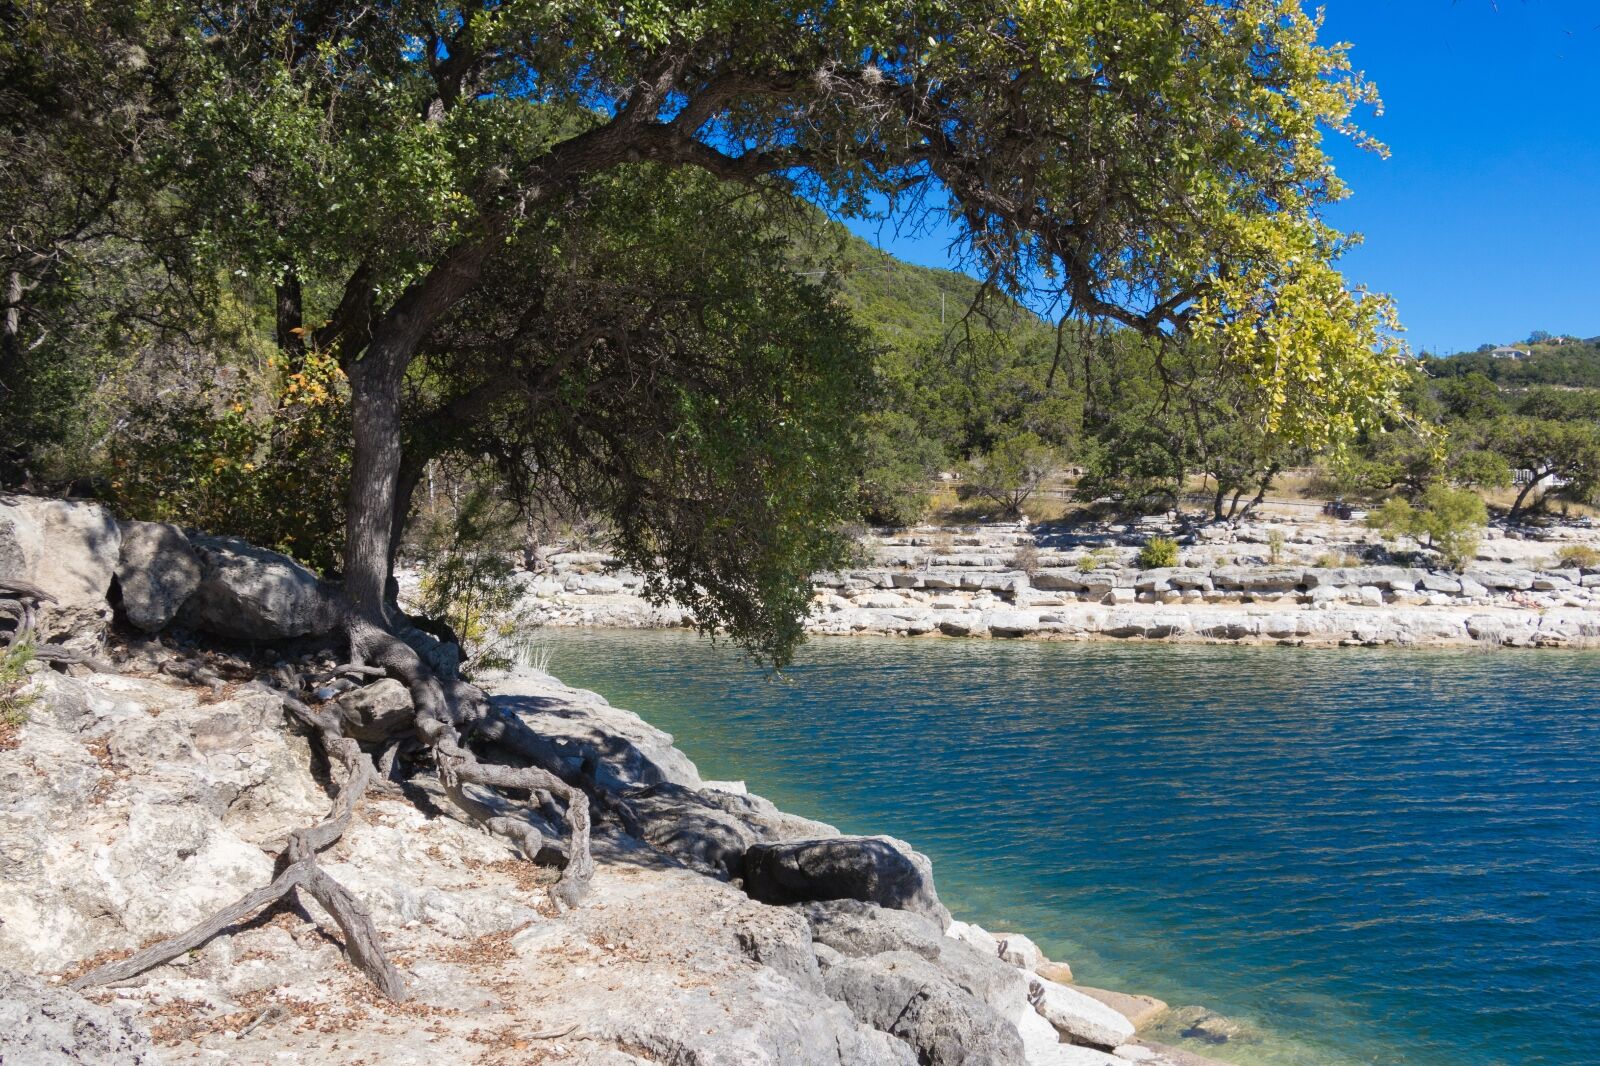 Hippy hollow in Texas one of the best nude beaches in USA 